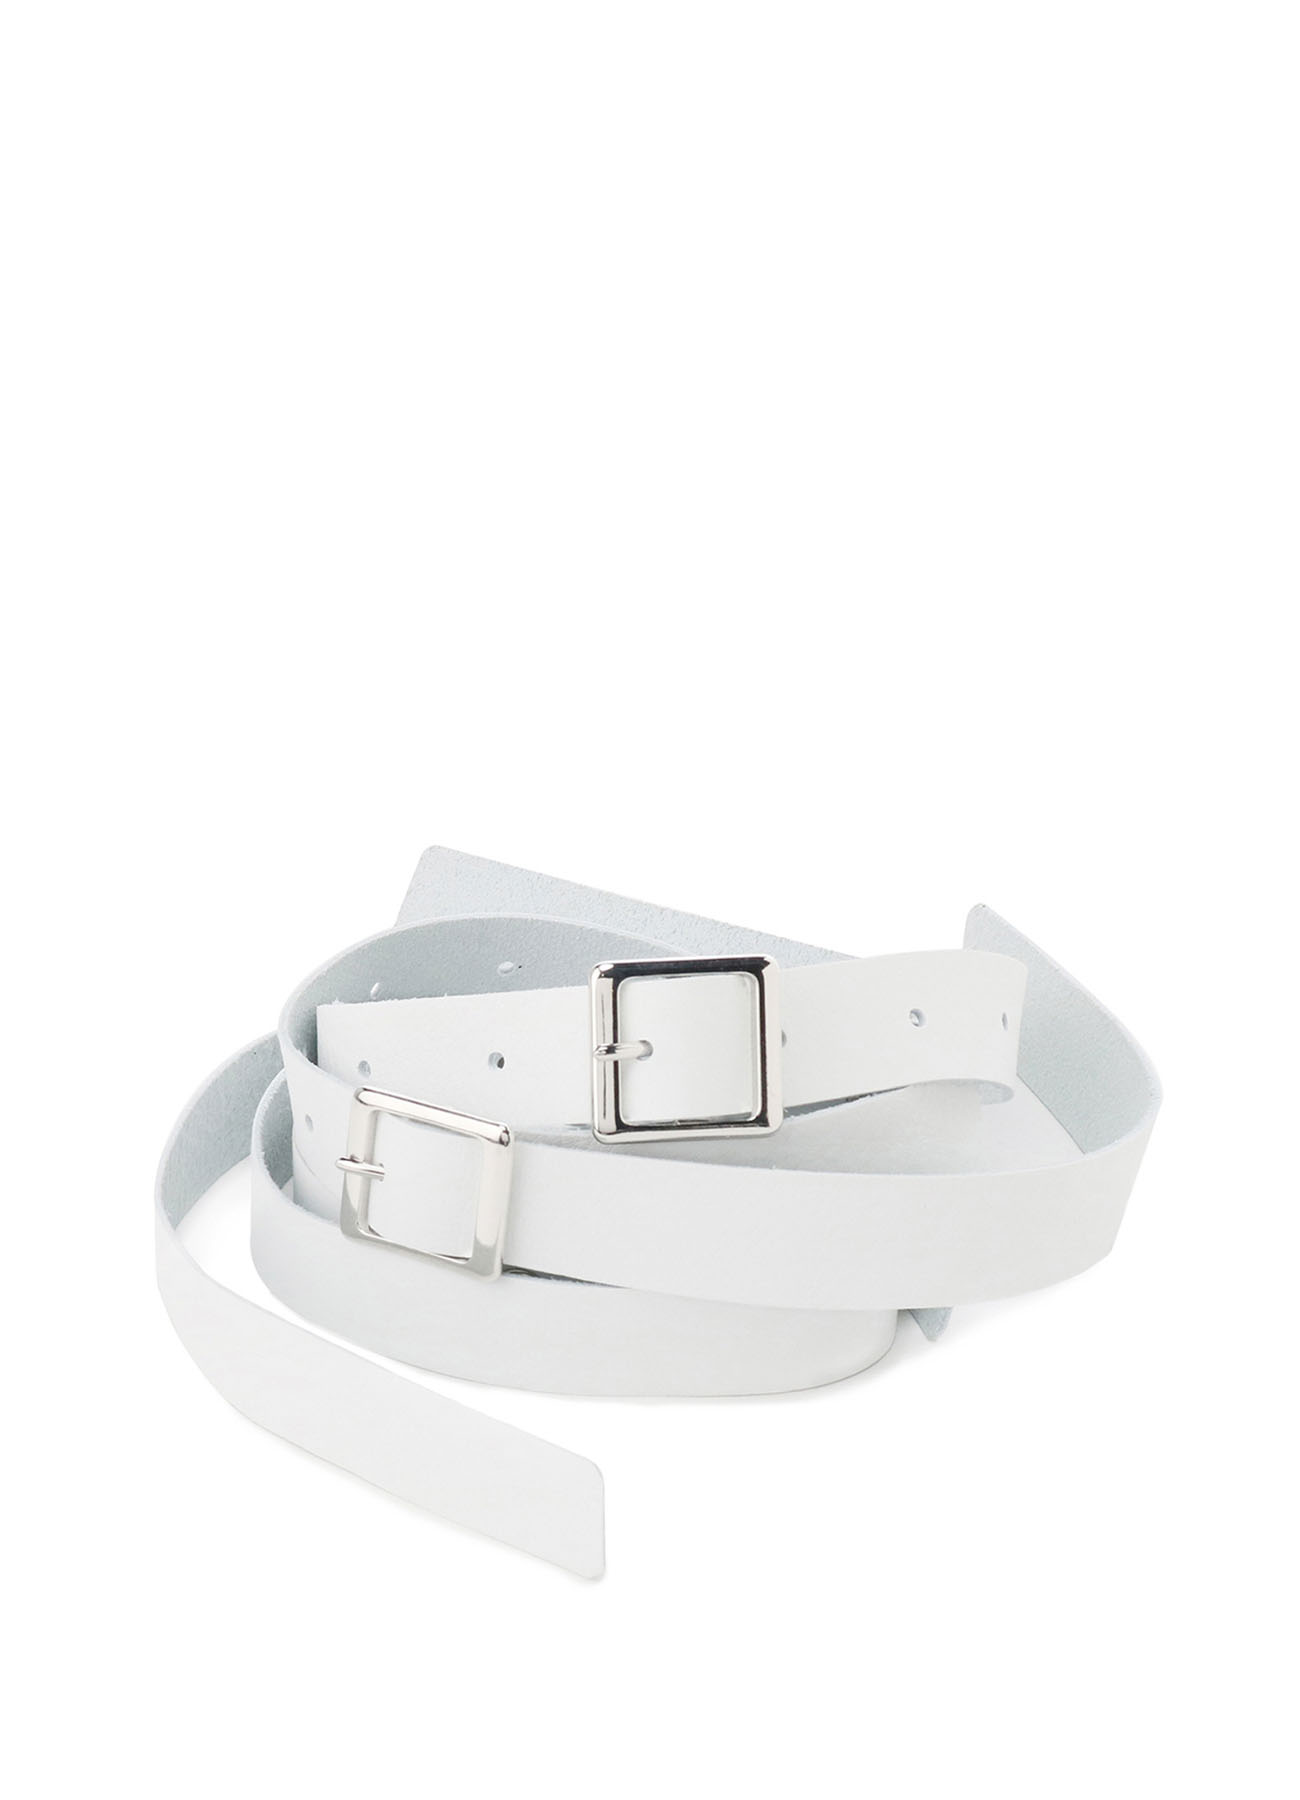 Soft Smooth Double Backle Belt